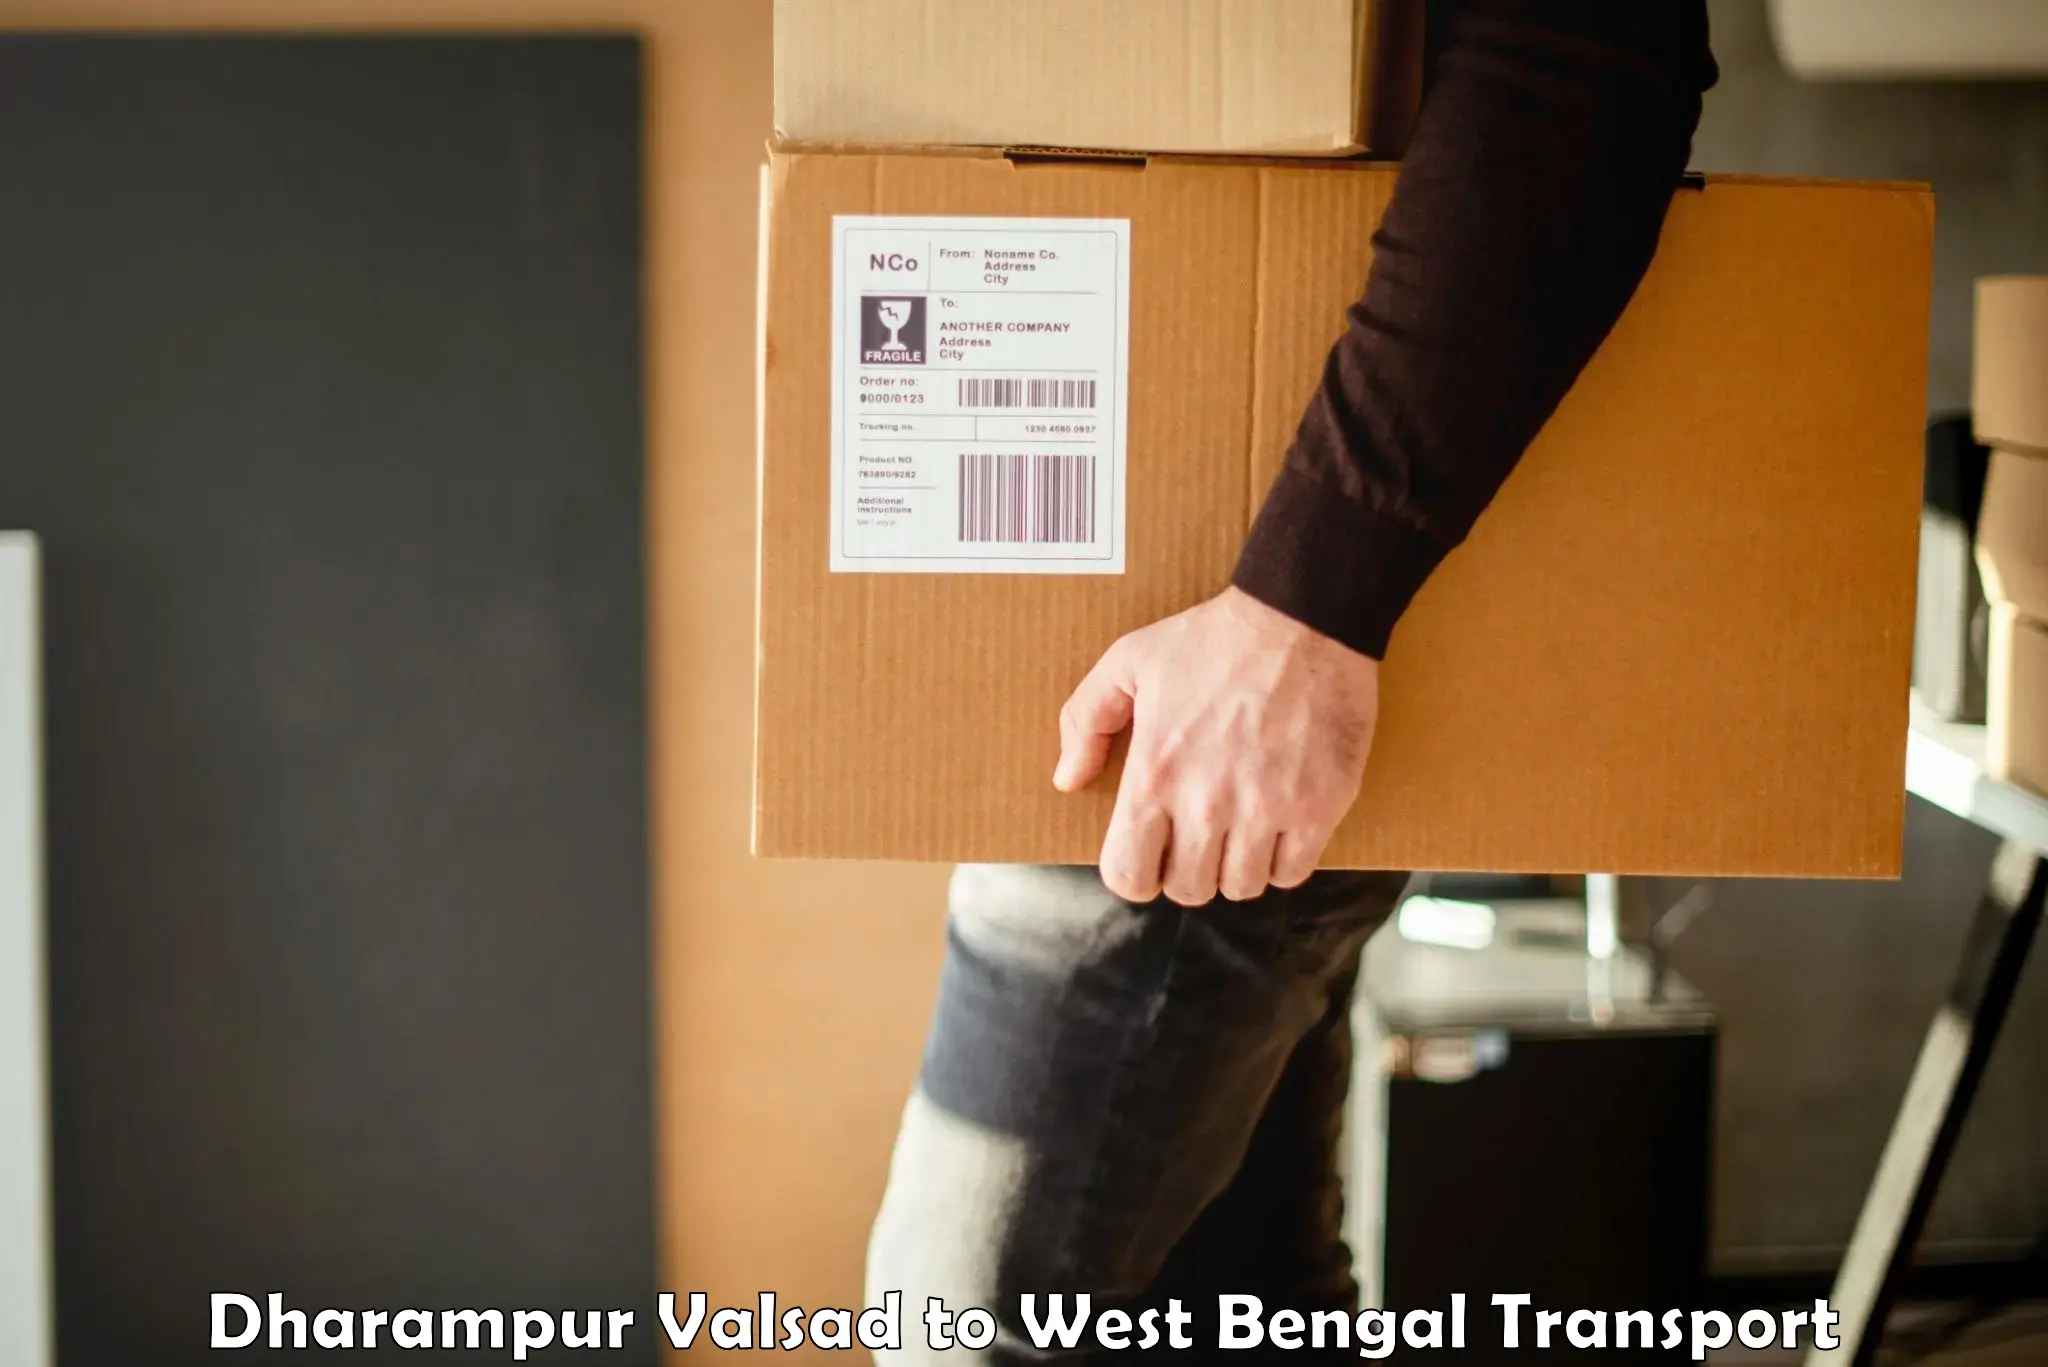 Package delivery services Dharampur Valsad to Kolkata Port